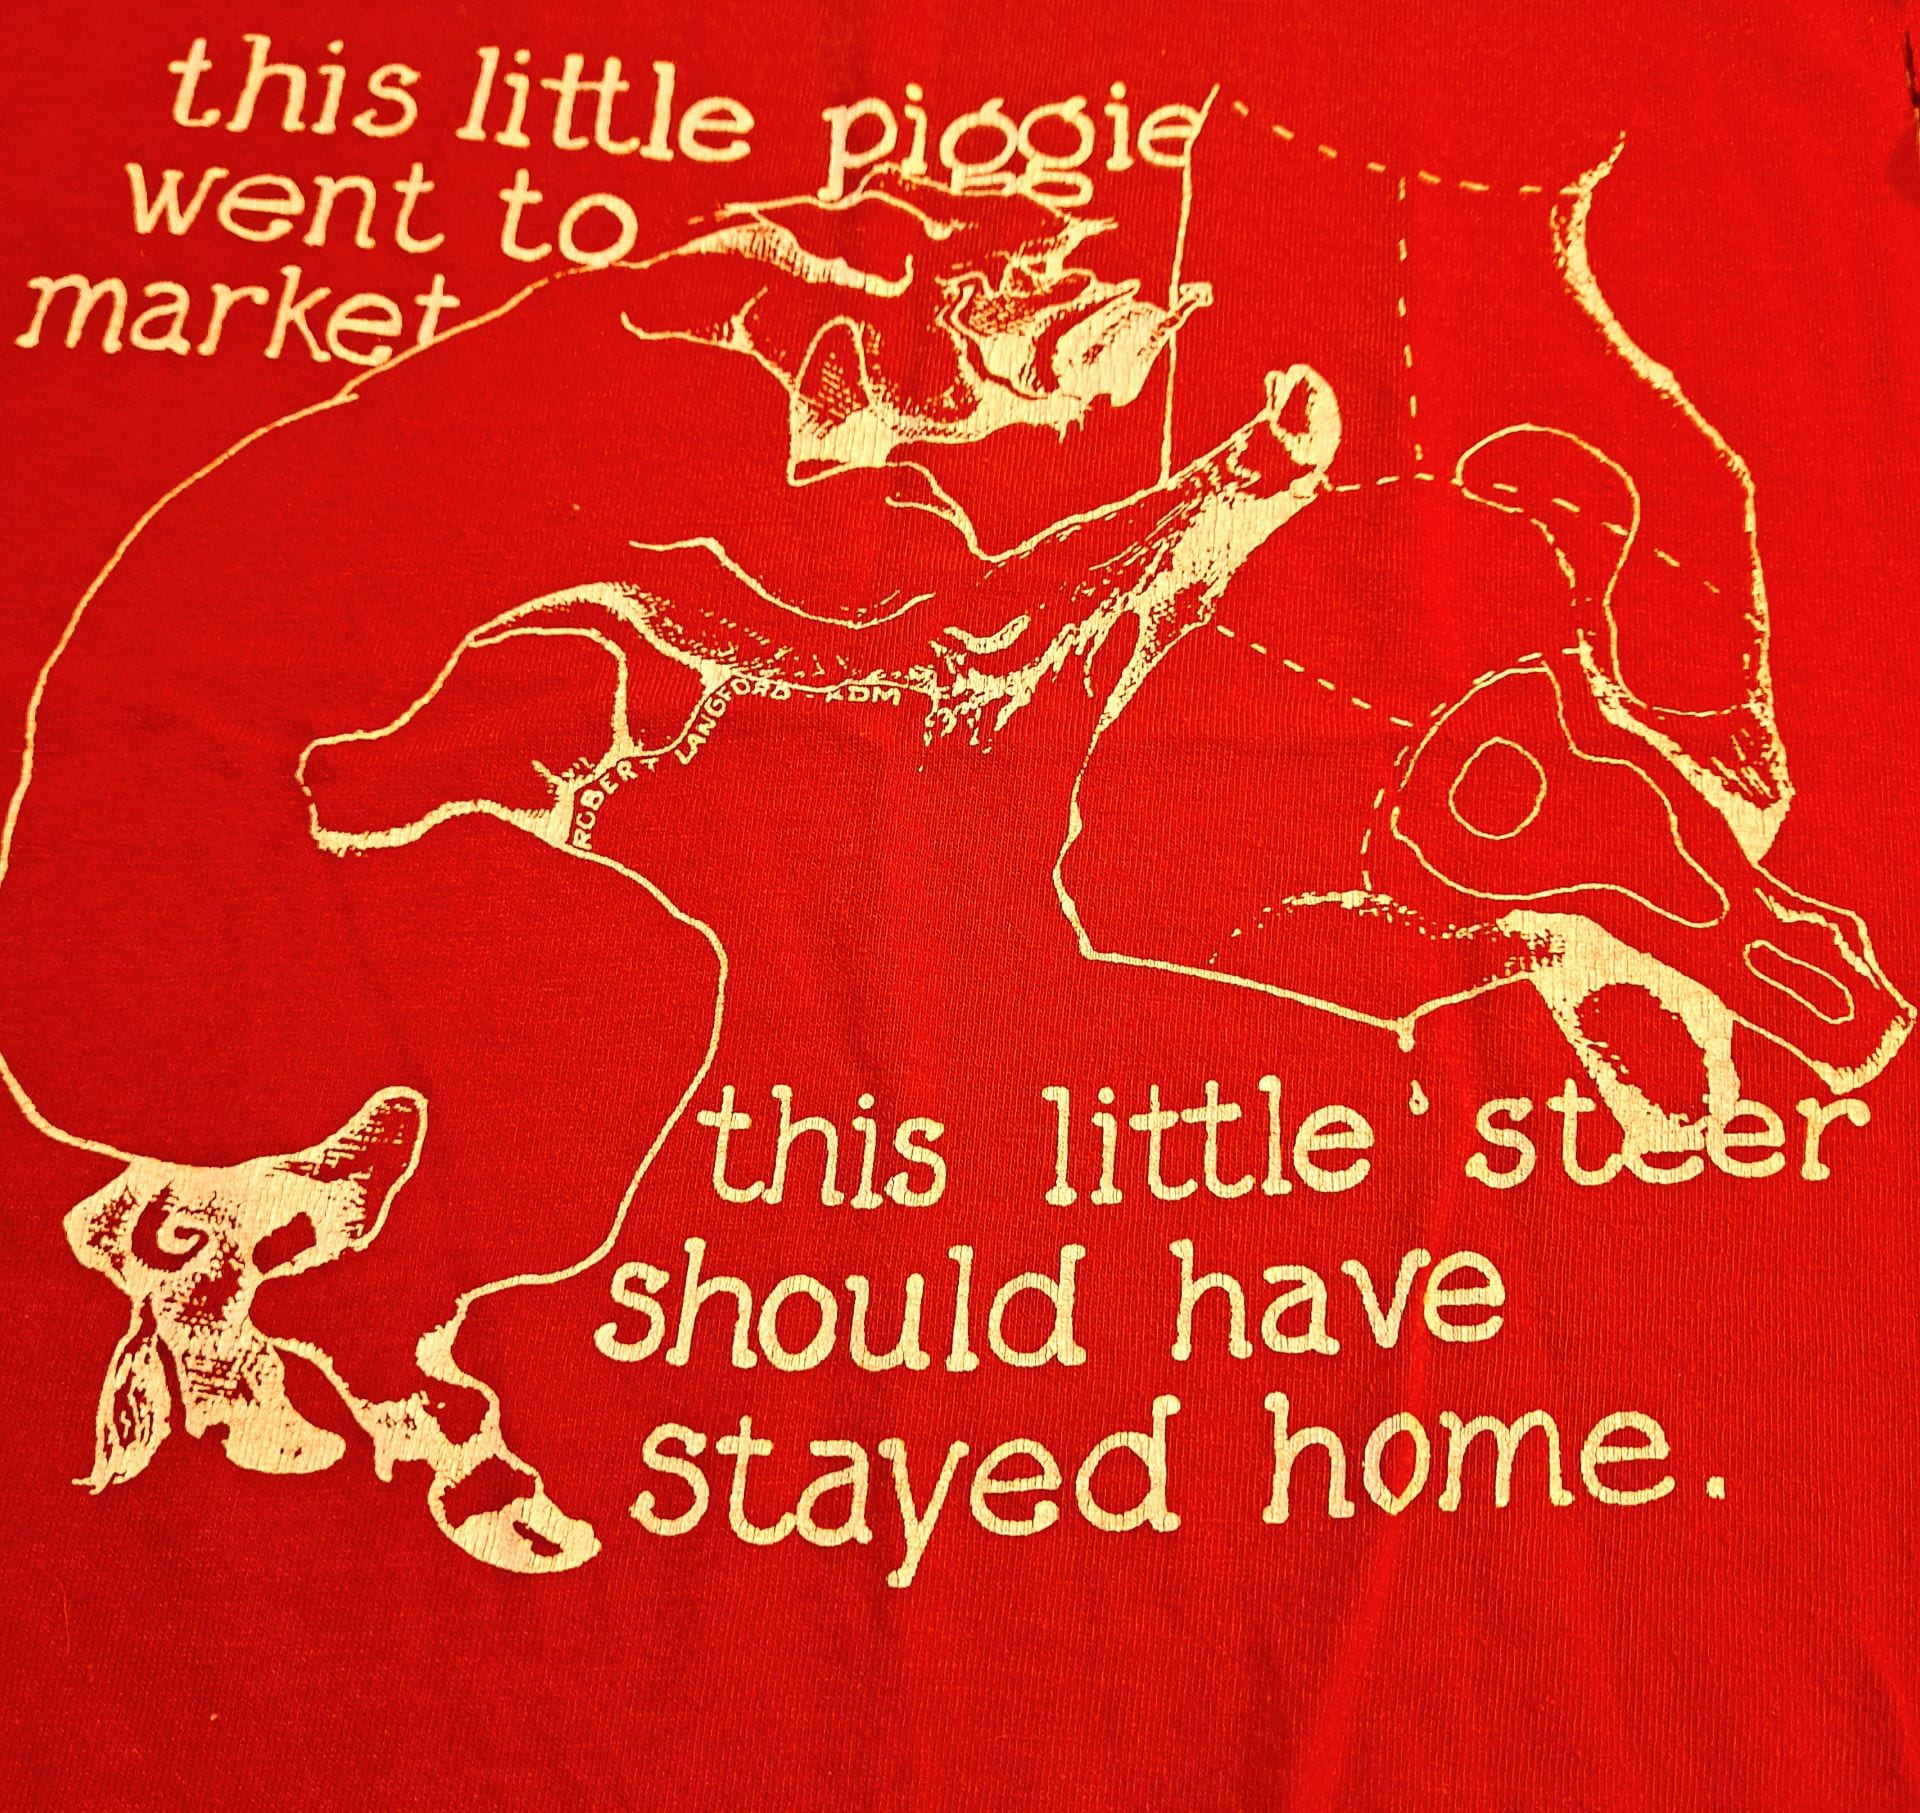 Close-up of a red t-shirt with a pig next to a steer about to be butchered. It says "This little piggie went to market; this little steer should have stayed home."